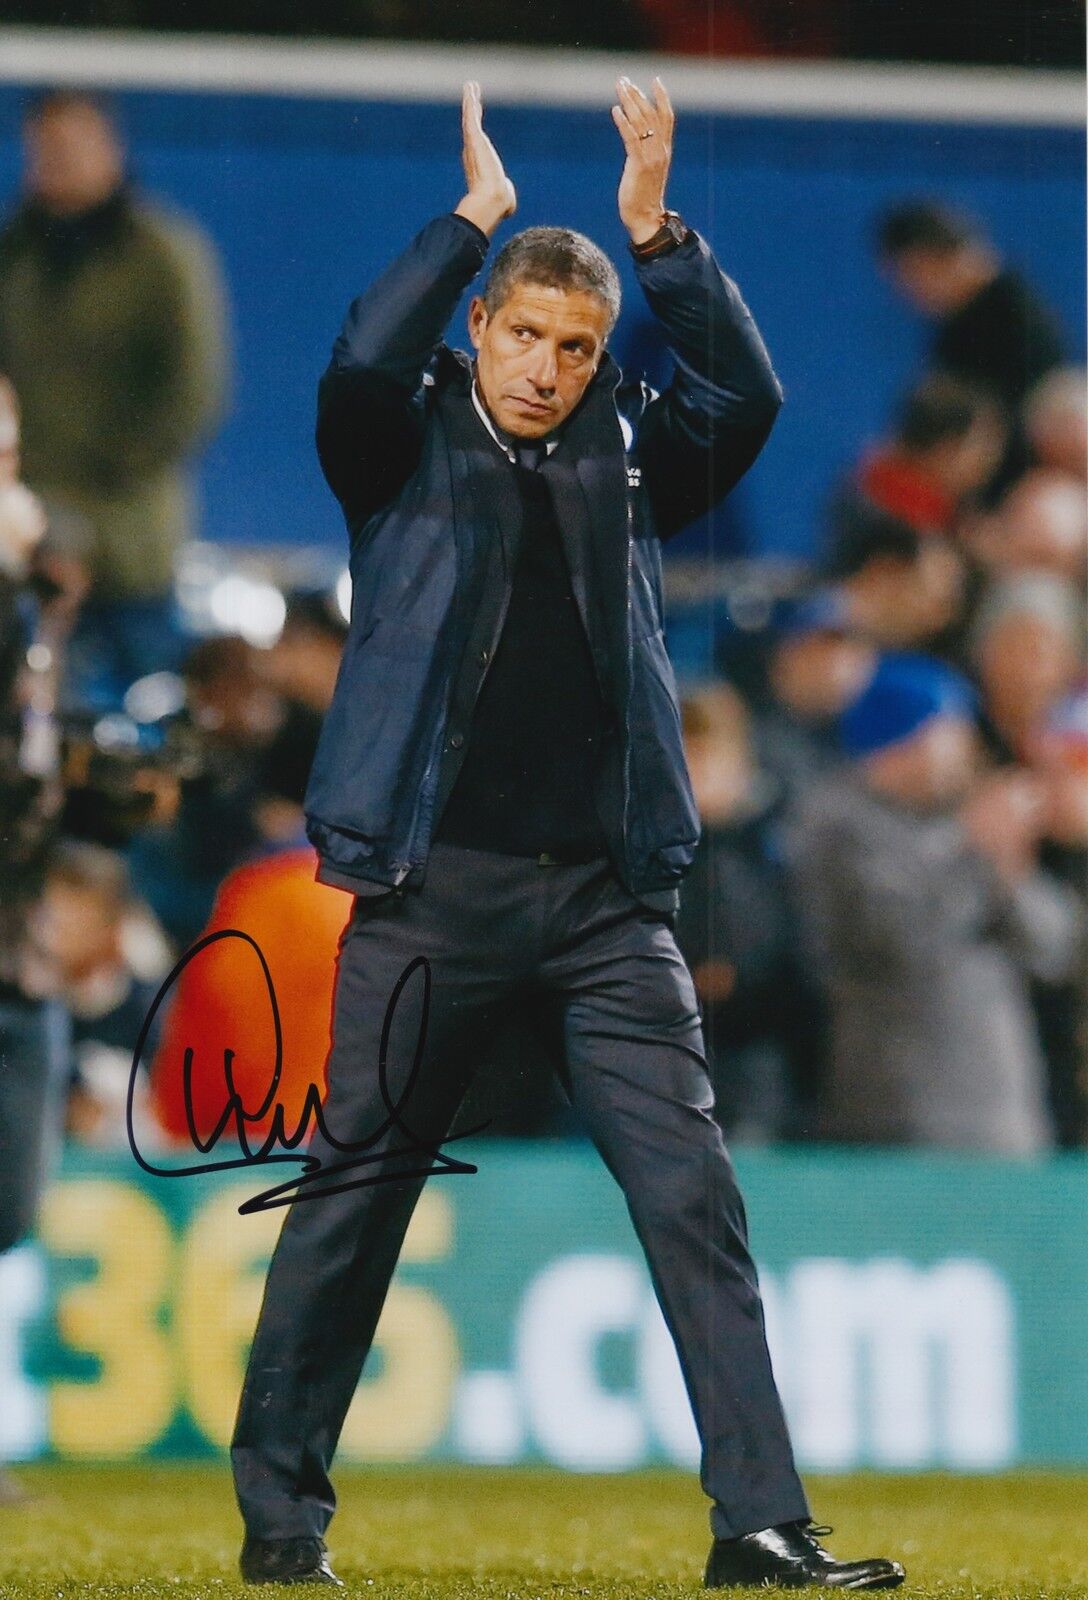 BRIGHTON & HOVE ALBION HAND SIGNED CHRIS HUGHTON 12X8 Photo Poster painting.